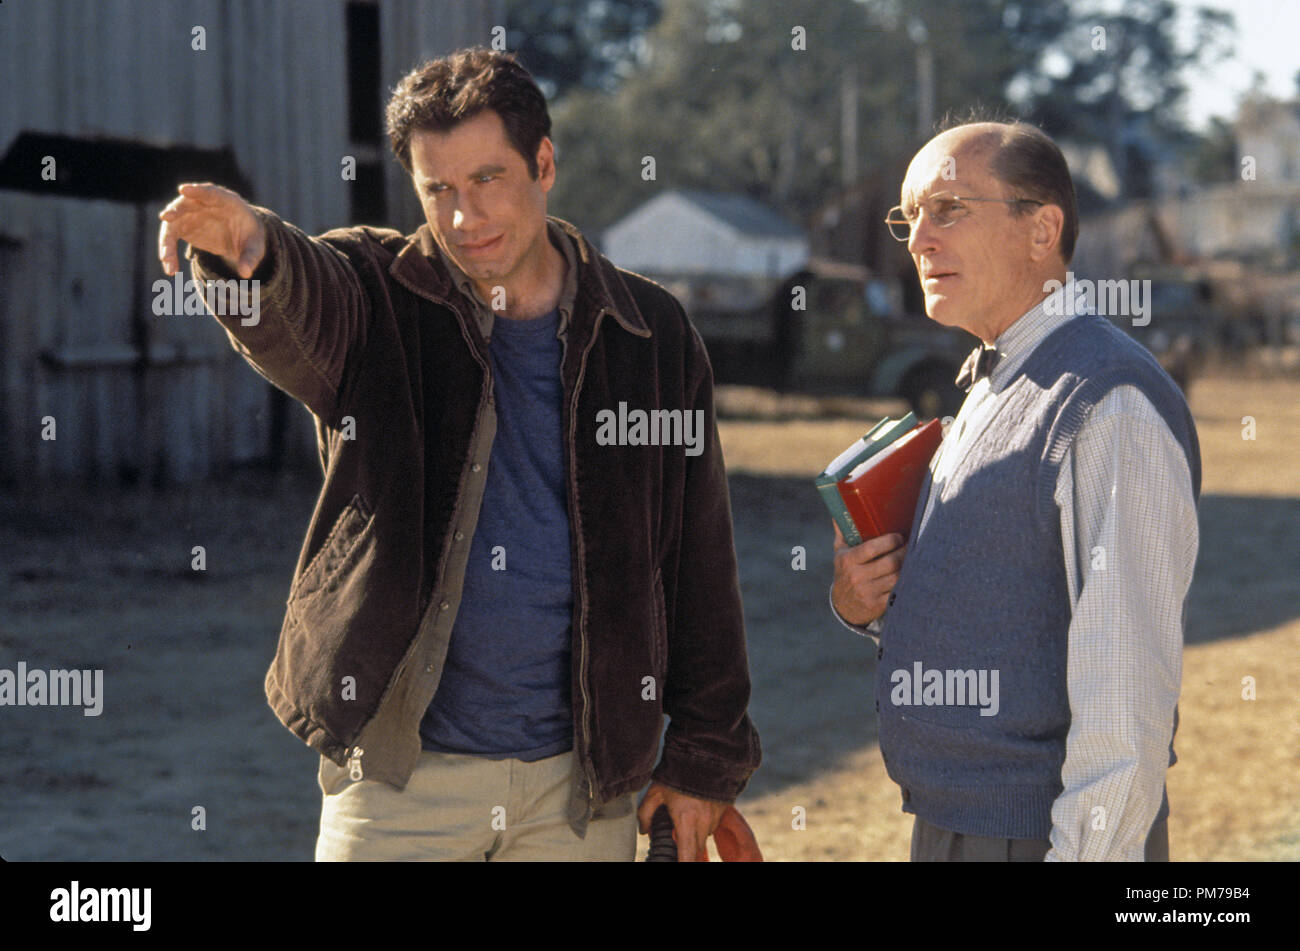 Film Still from 'Phenomenon' John Travolta, Robert Duvall © 1996 Touchstone Pictures Photo Credit: Zade Rosenthal  File Reference # 31042302THA  For Editorial Use Only - All Rights Reserved Stock Photo